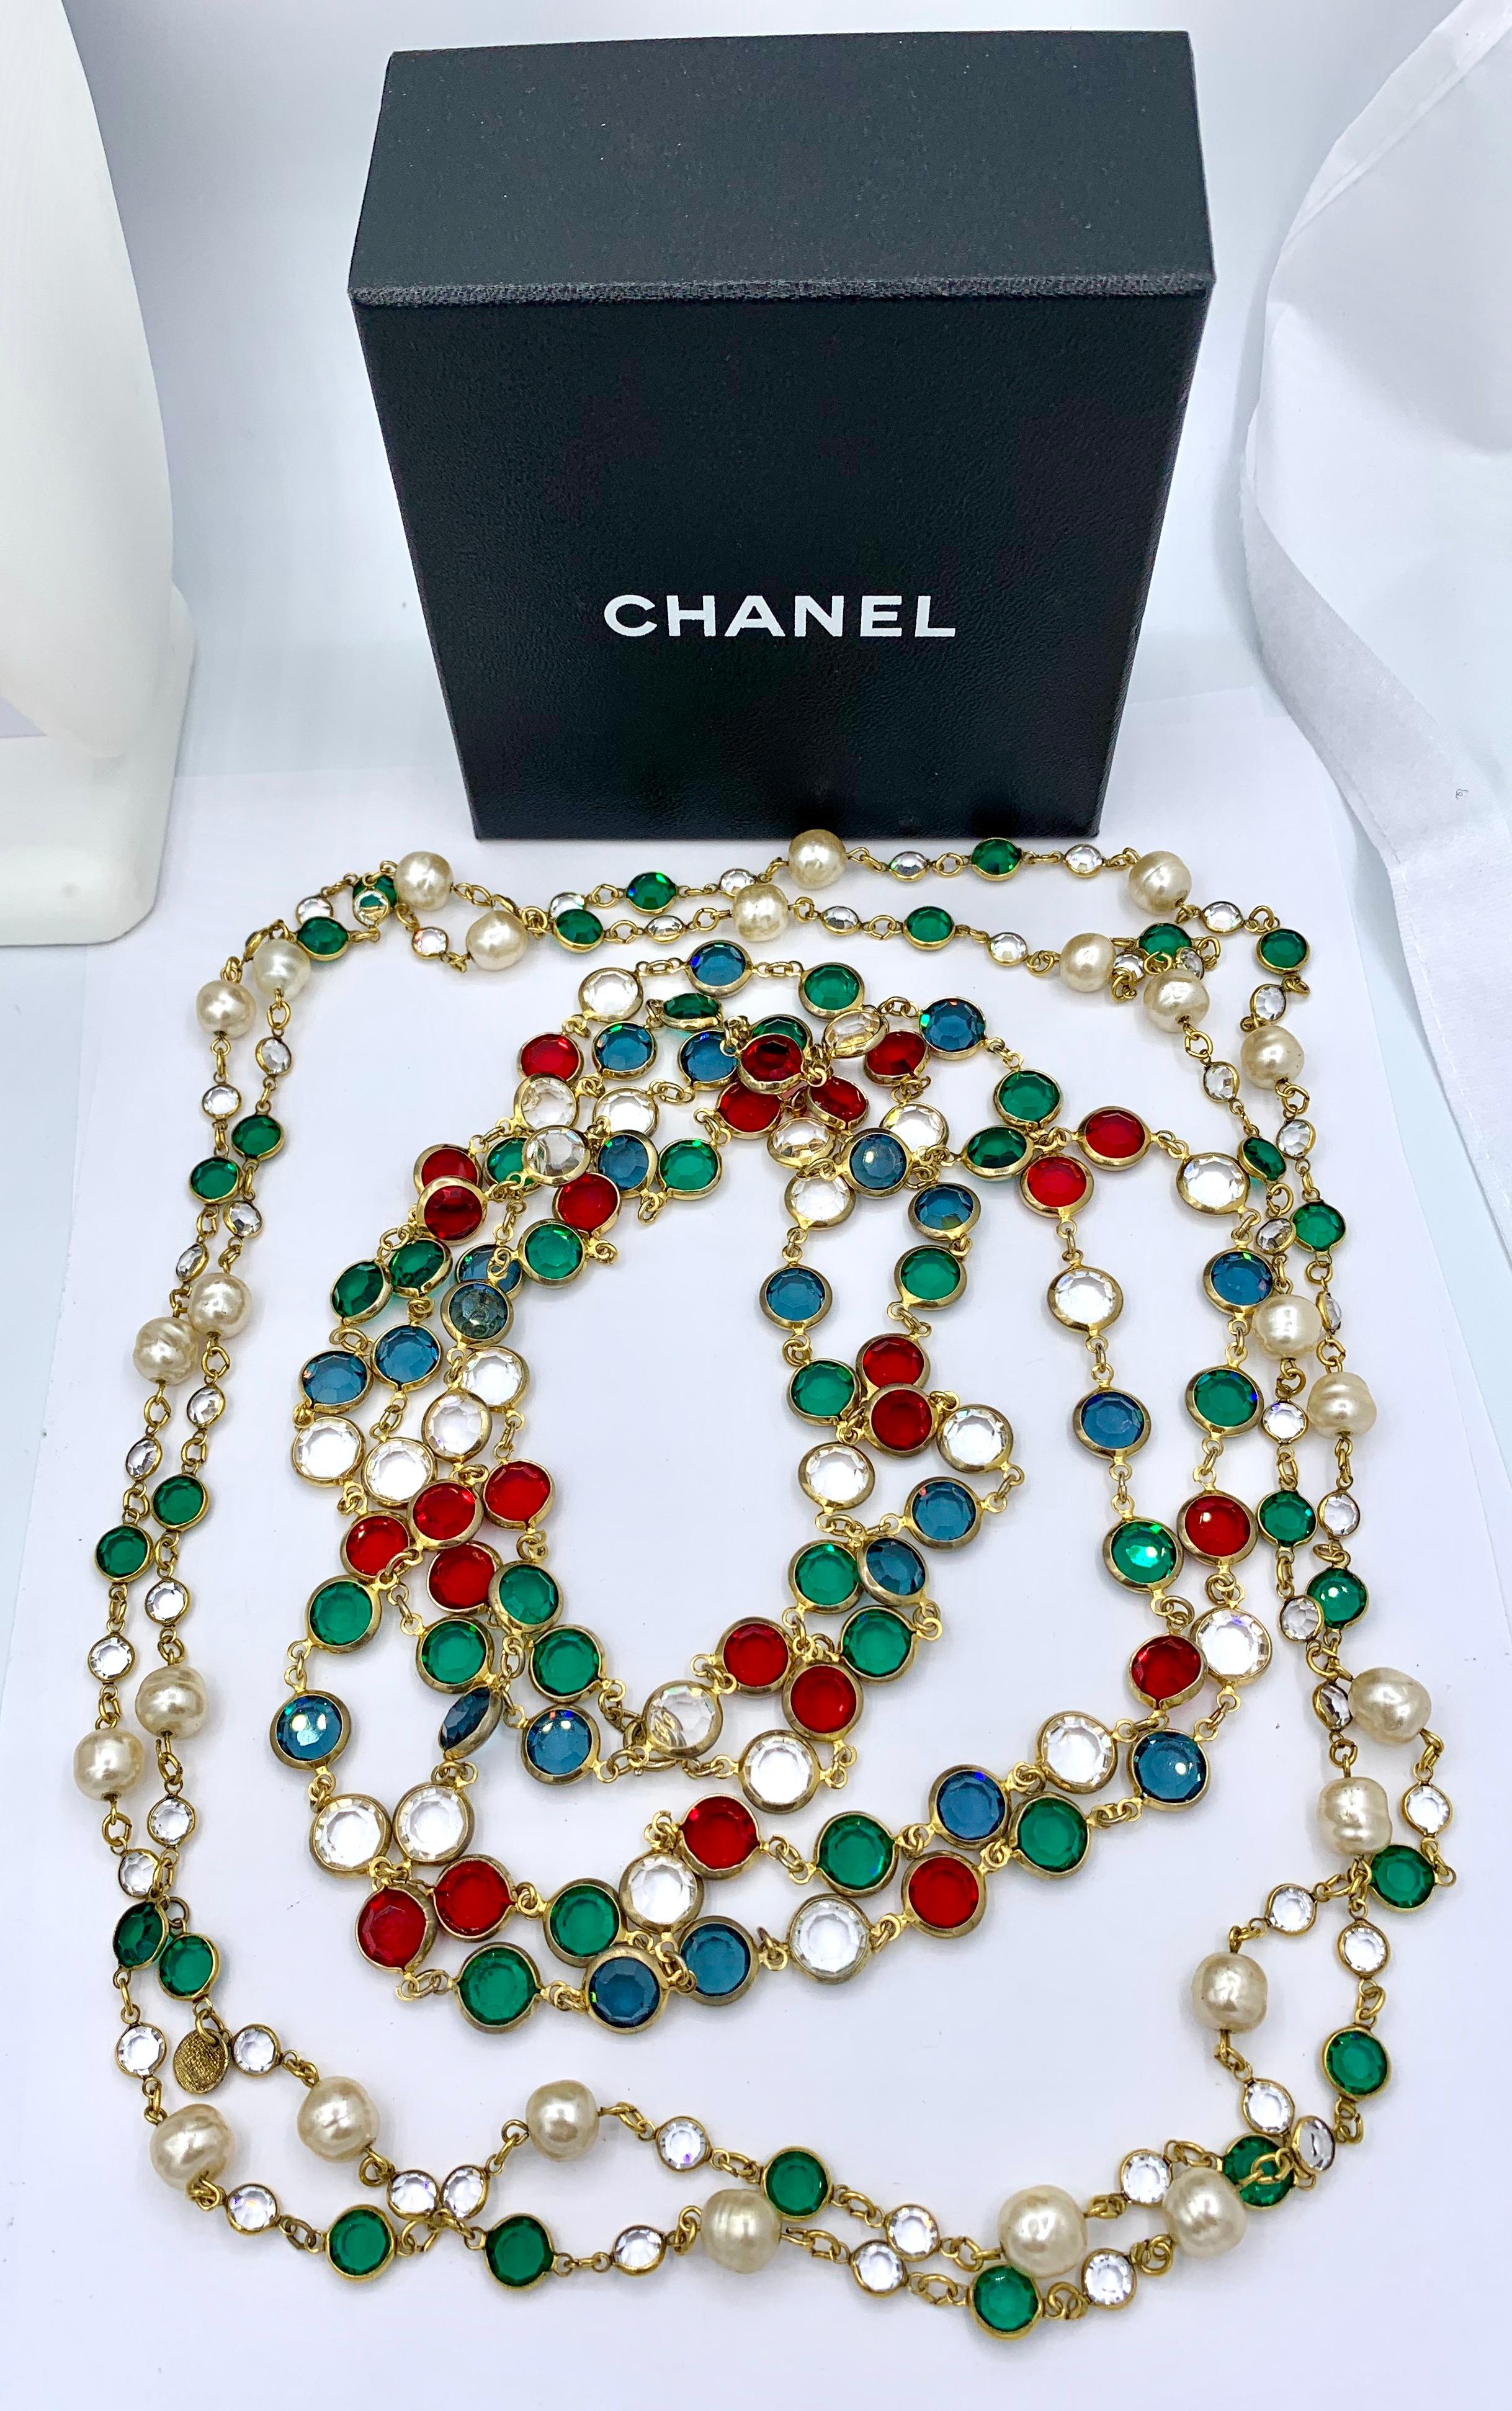 Women's Two Chanel Gripoix Necklaces 1981 Signed Estate of Barbara Taylor Bradford For Sale